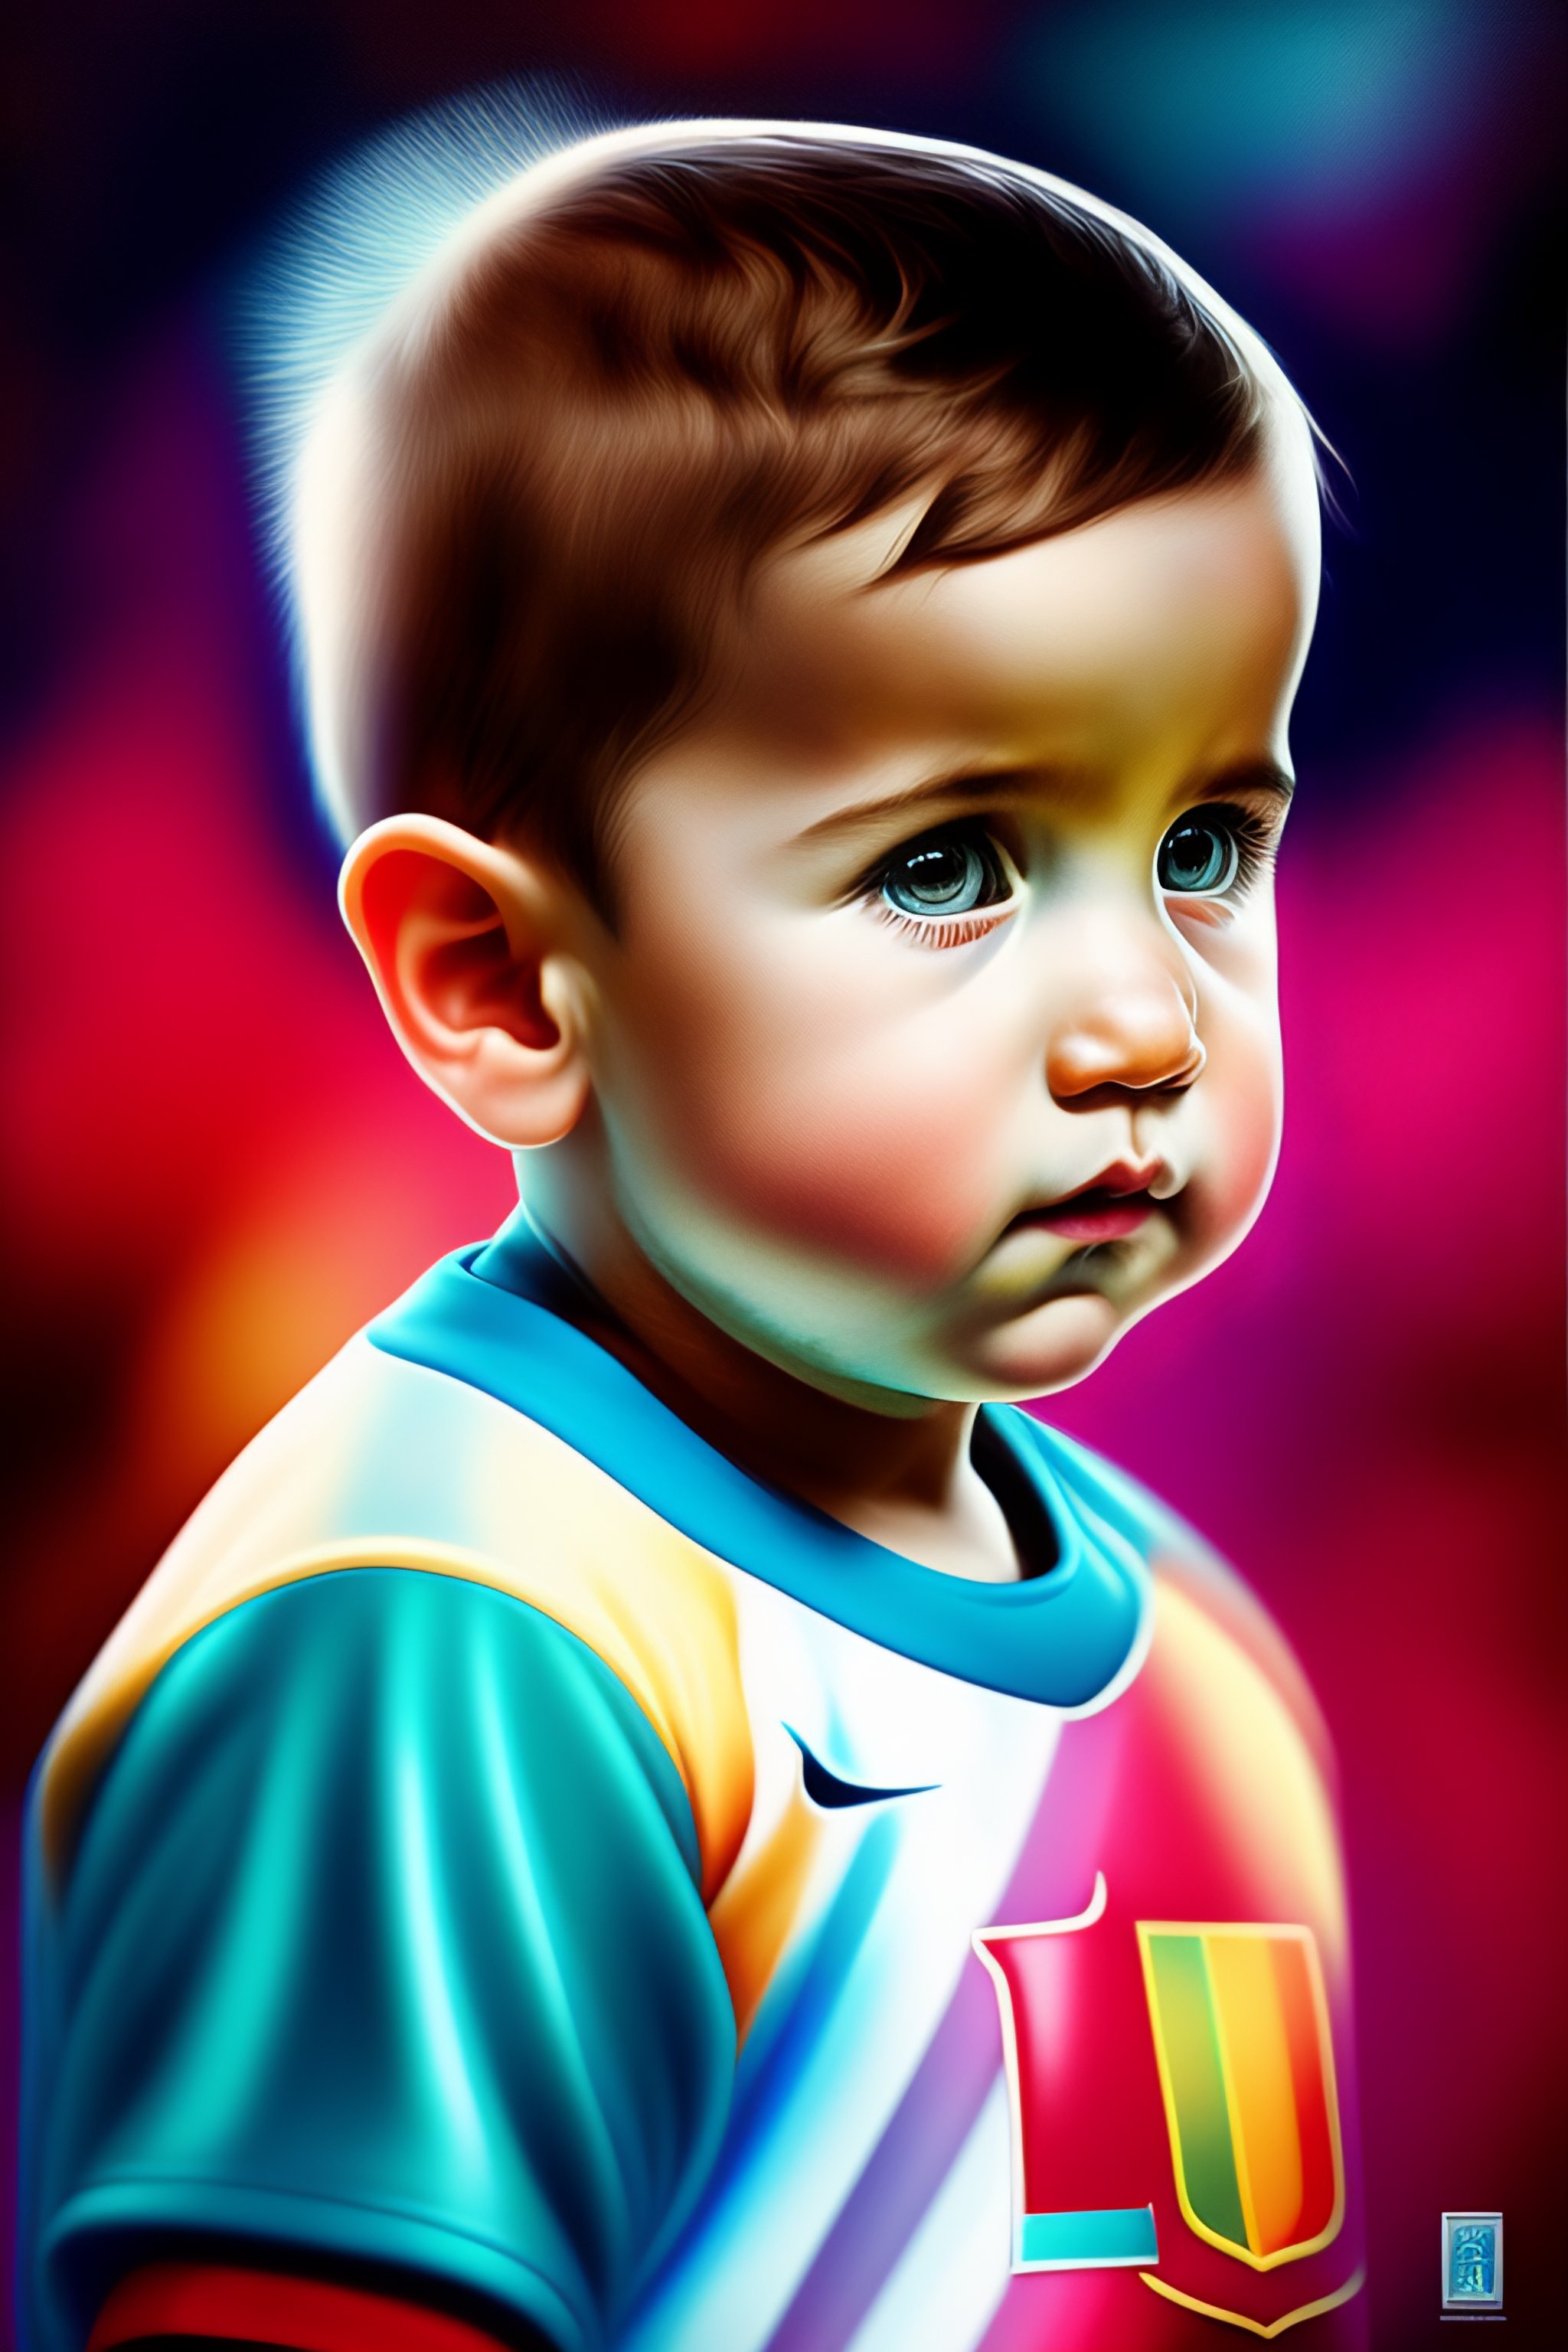 Lexica - Portrait of Messi playing basketball